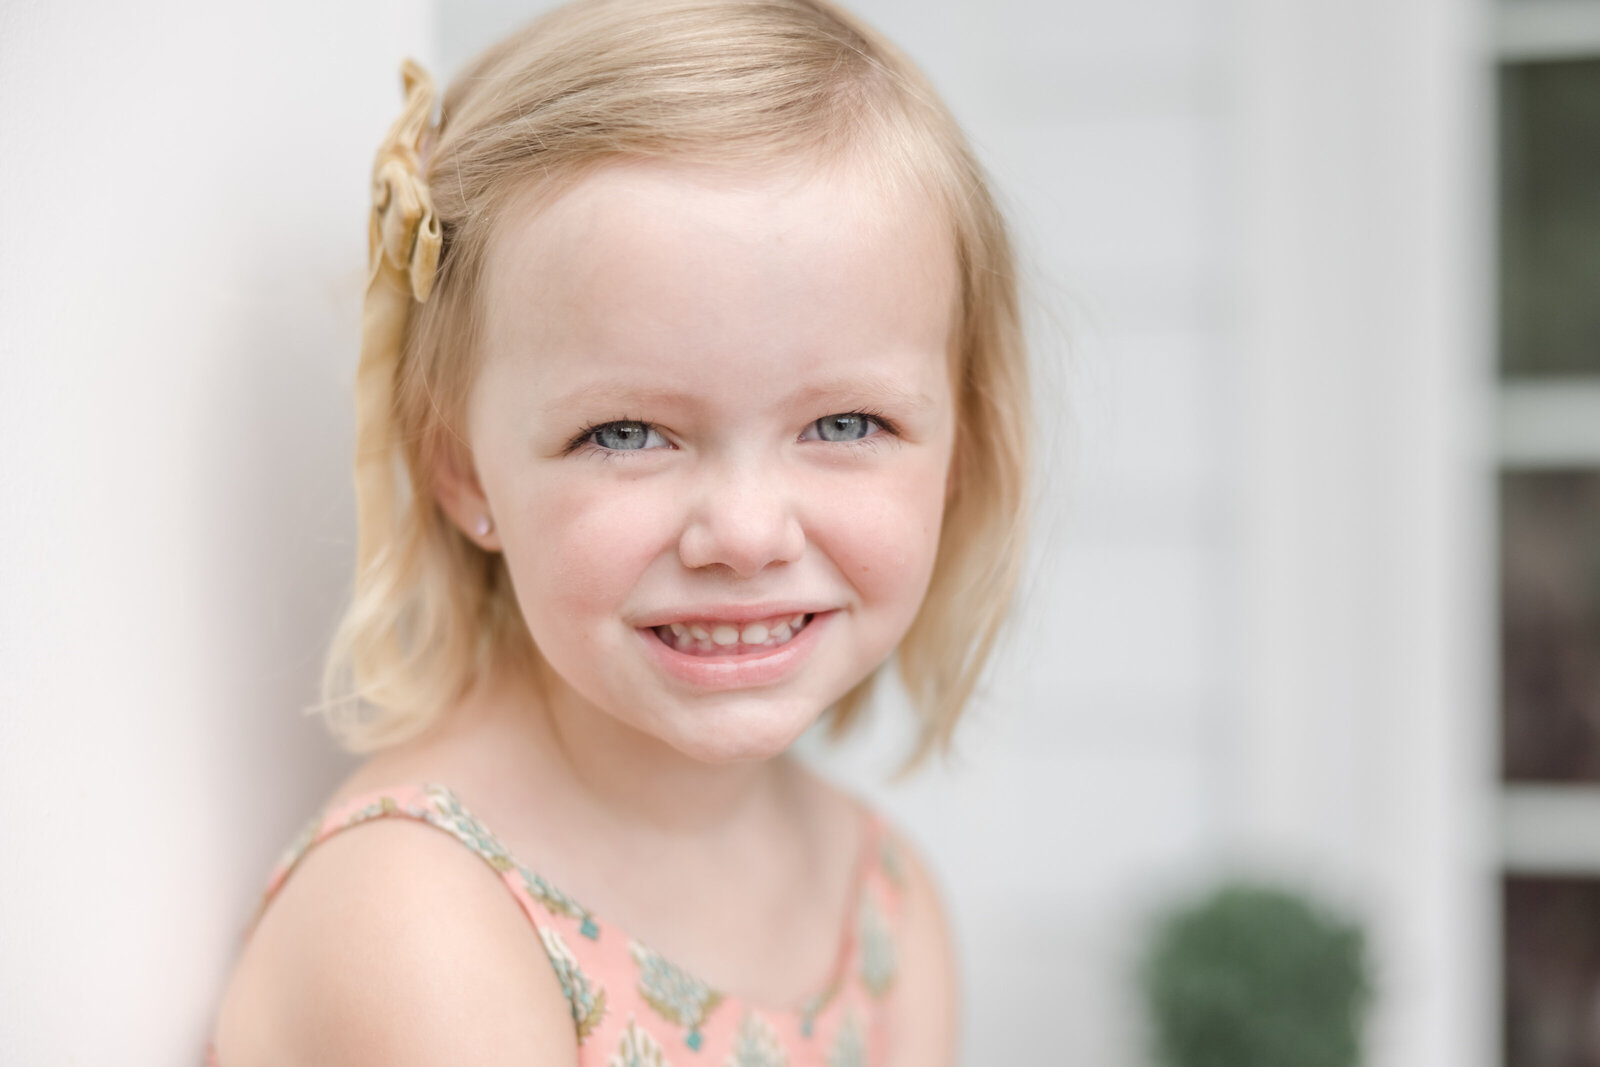 Young girl smiling for portrait.